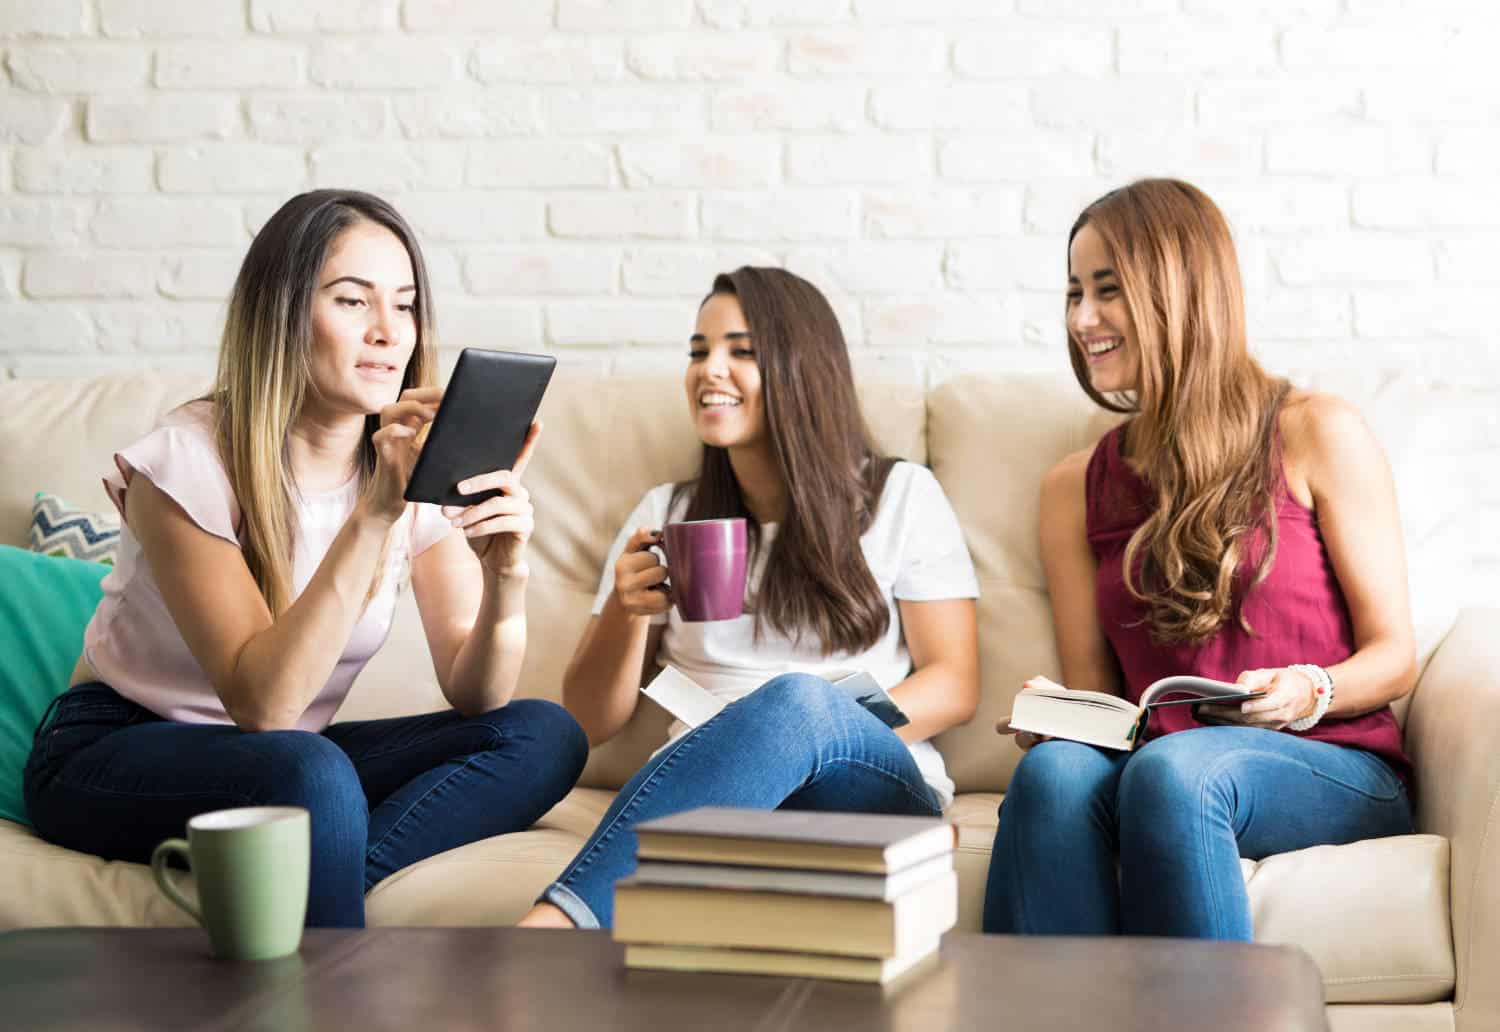 Photo of three young ladies sitting on a couch and reading books